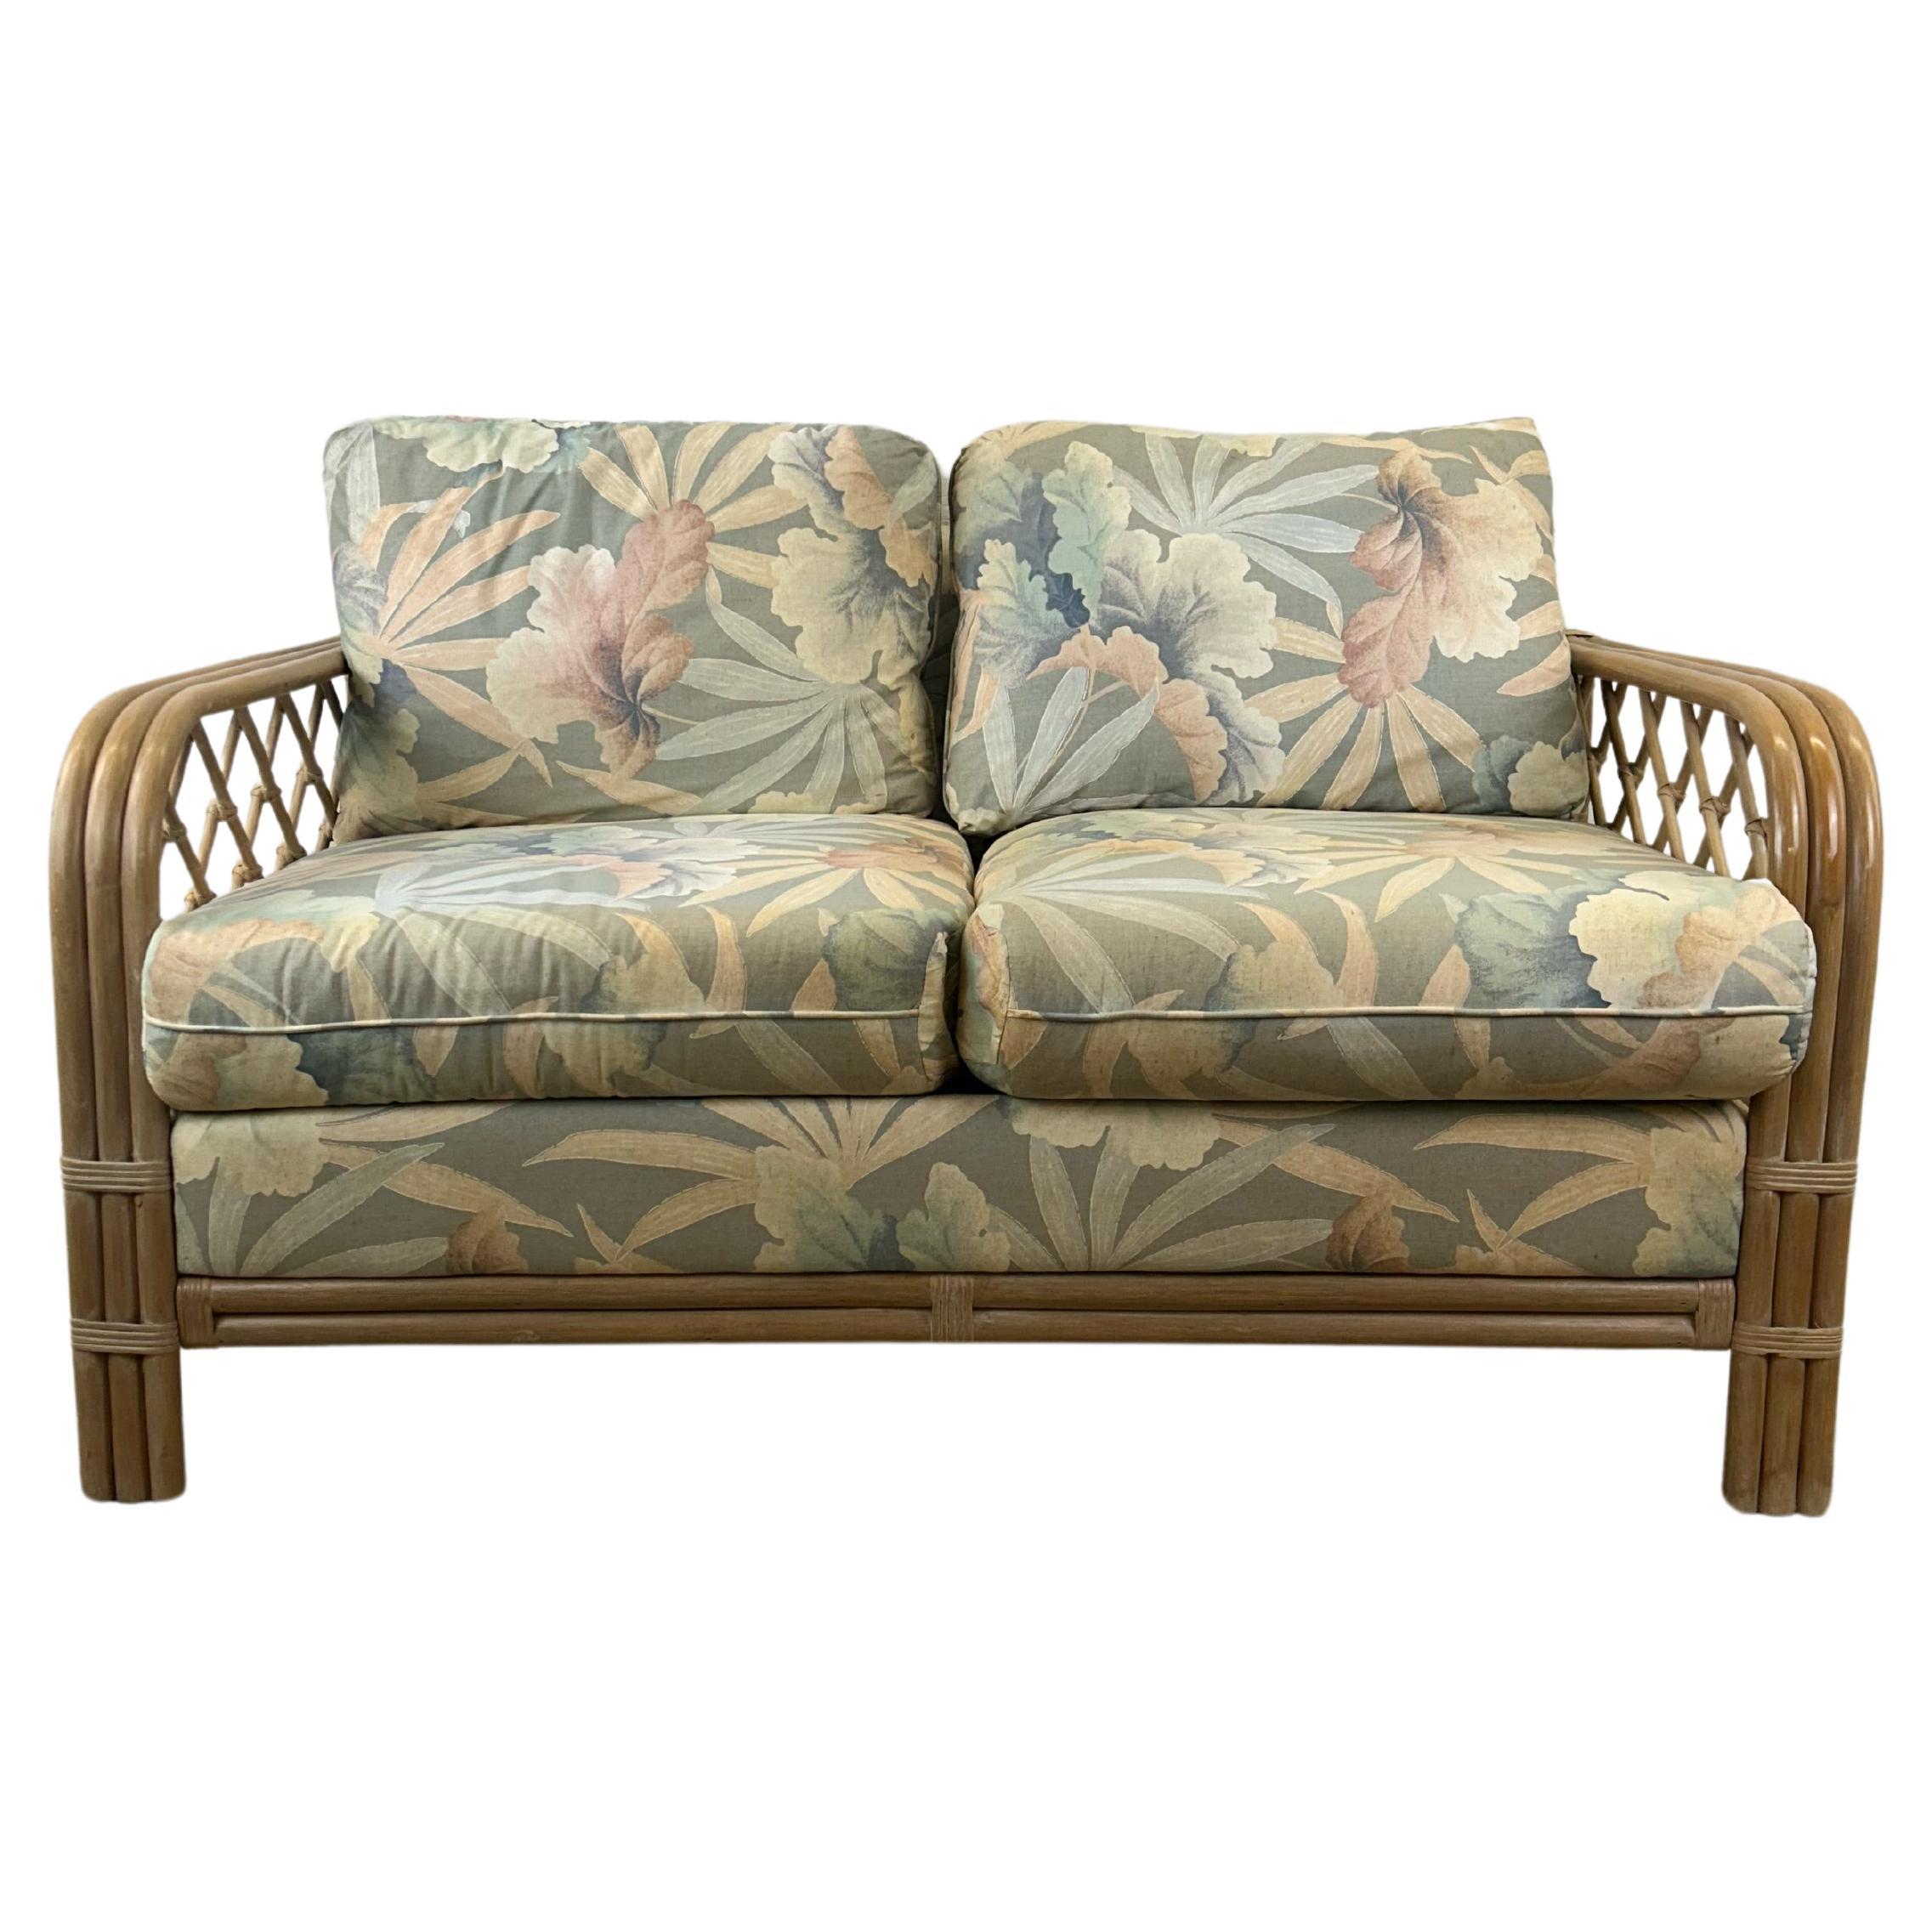 Vintage Boho Chic Rattan Loveseat with Floral Upholstery For Sale